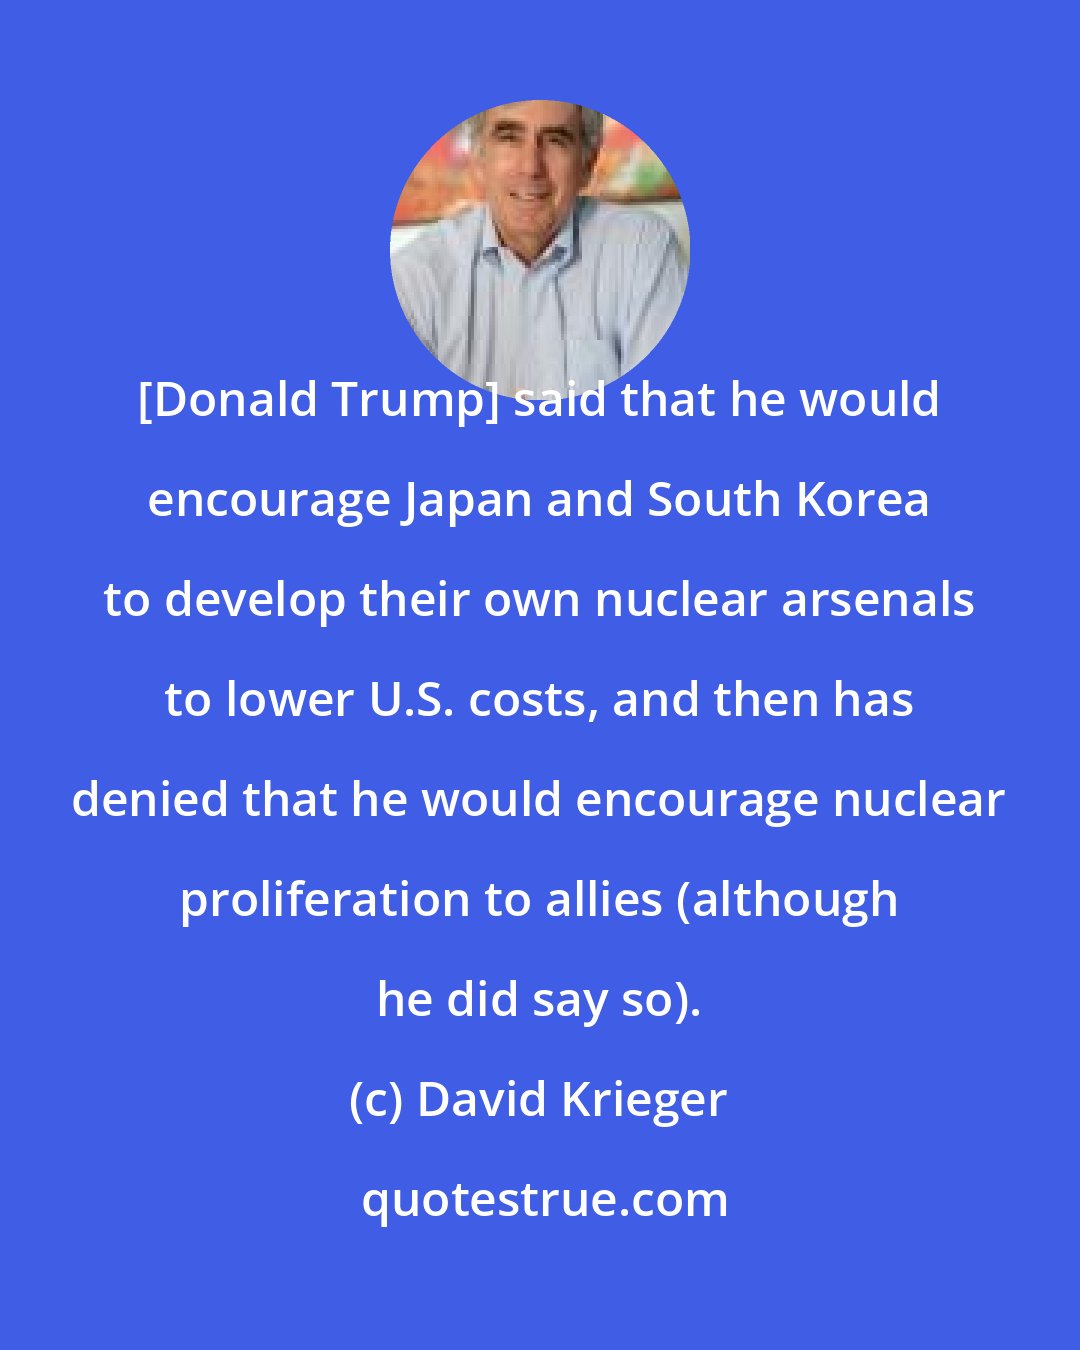 David Krieger: [Donald Trump] said that he would encourage Japan and South Korea to develop their own nuclear arsenals to lower U.S. costs, and then has denied that he would encourage nuclear proliferation to allies (although he did say so).